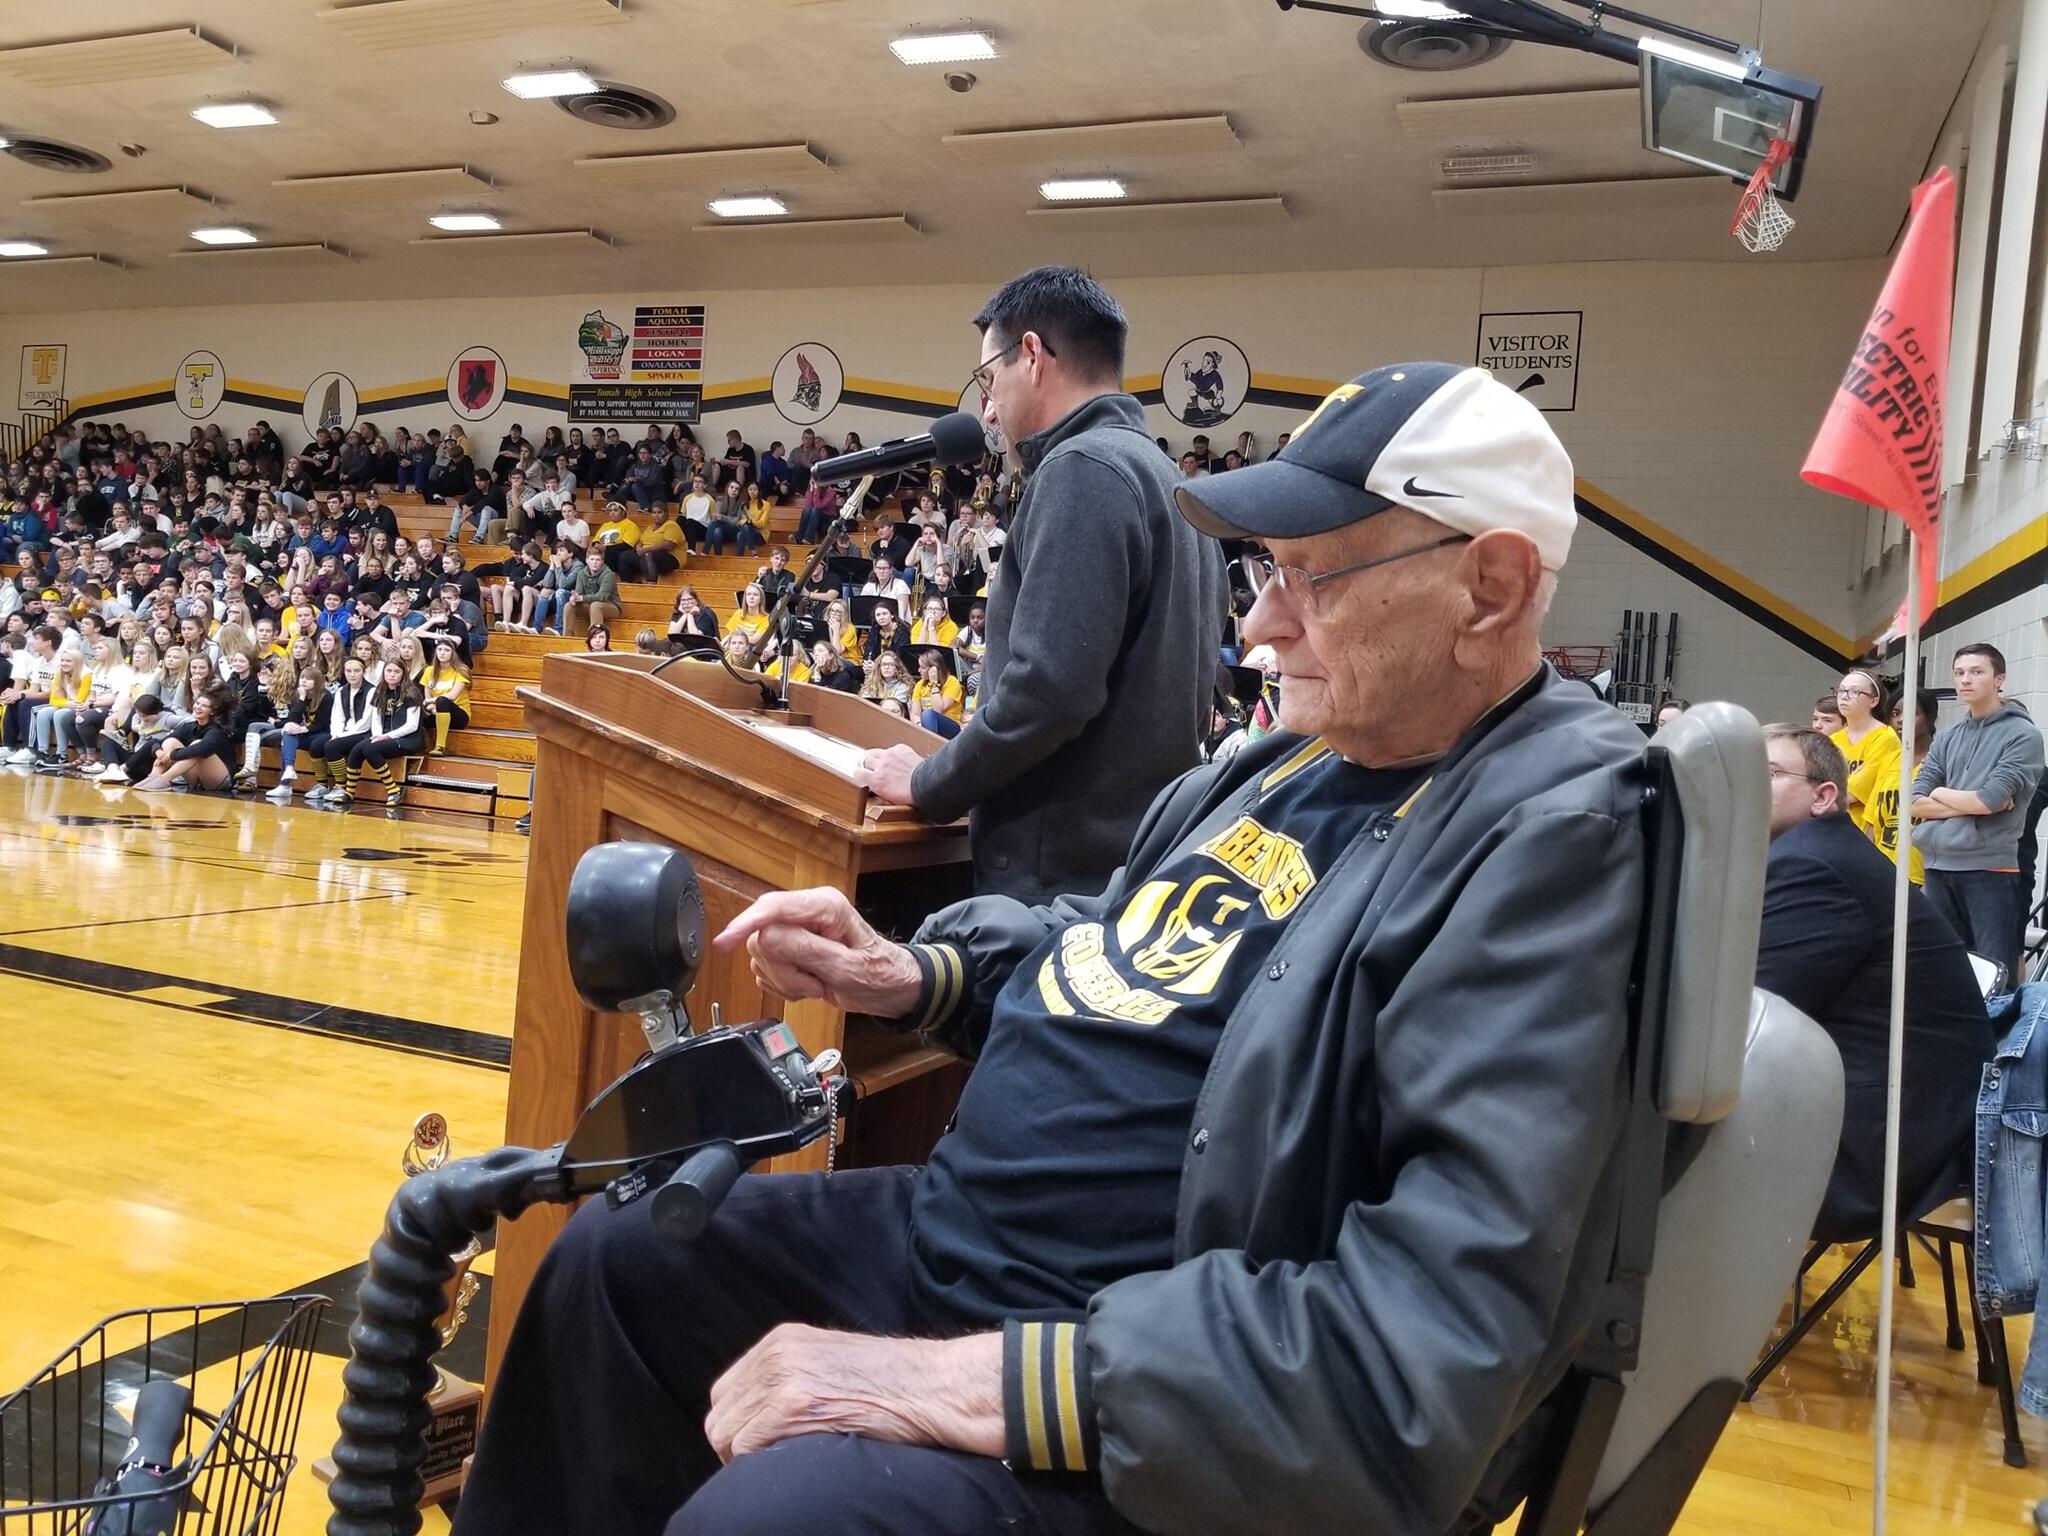 Bob is introduced to the Tomah High students during their Homecoming Pep Rally